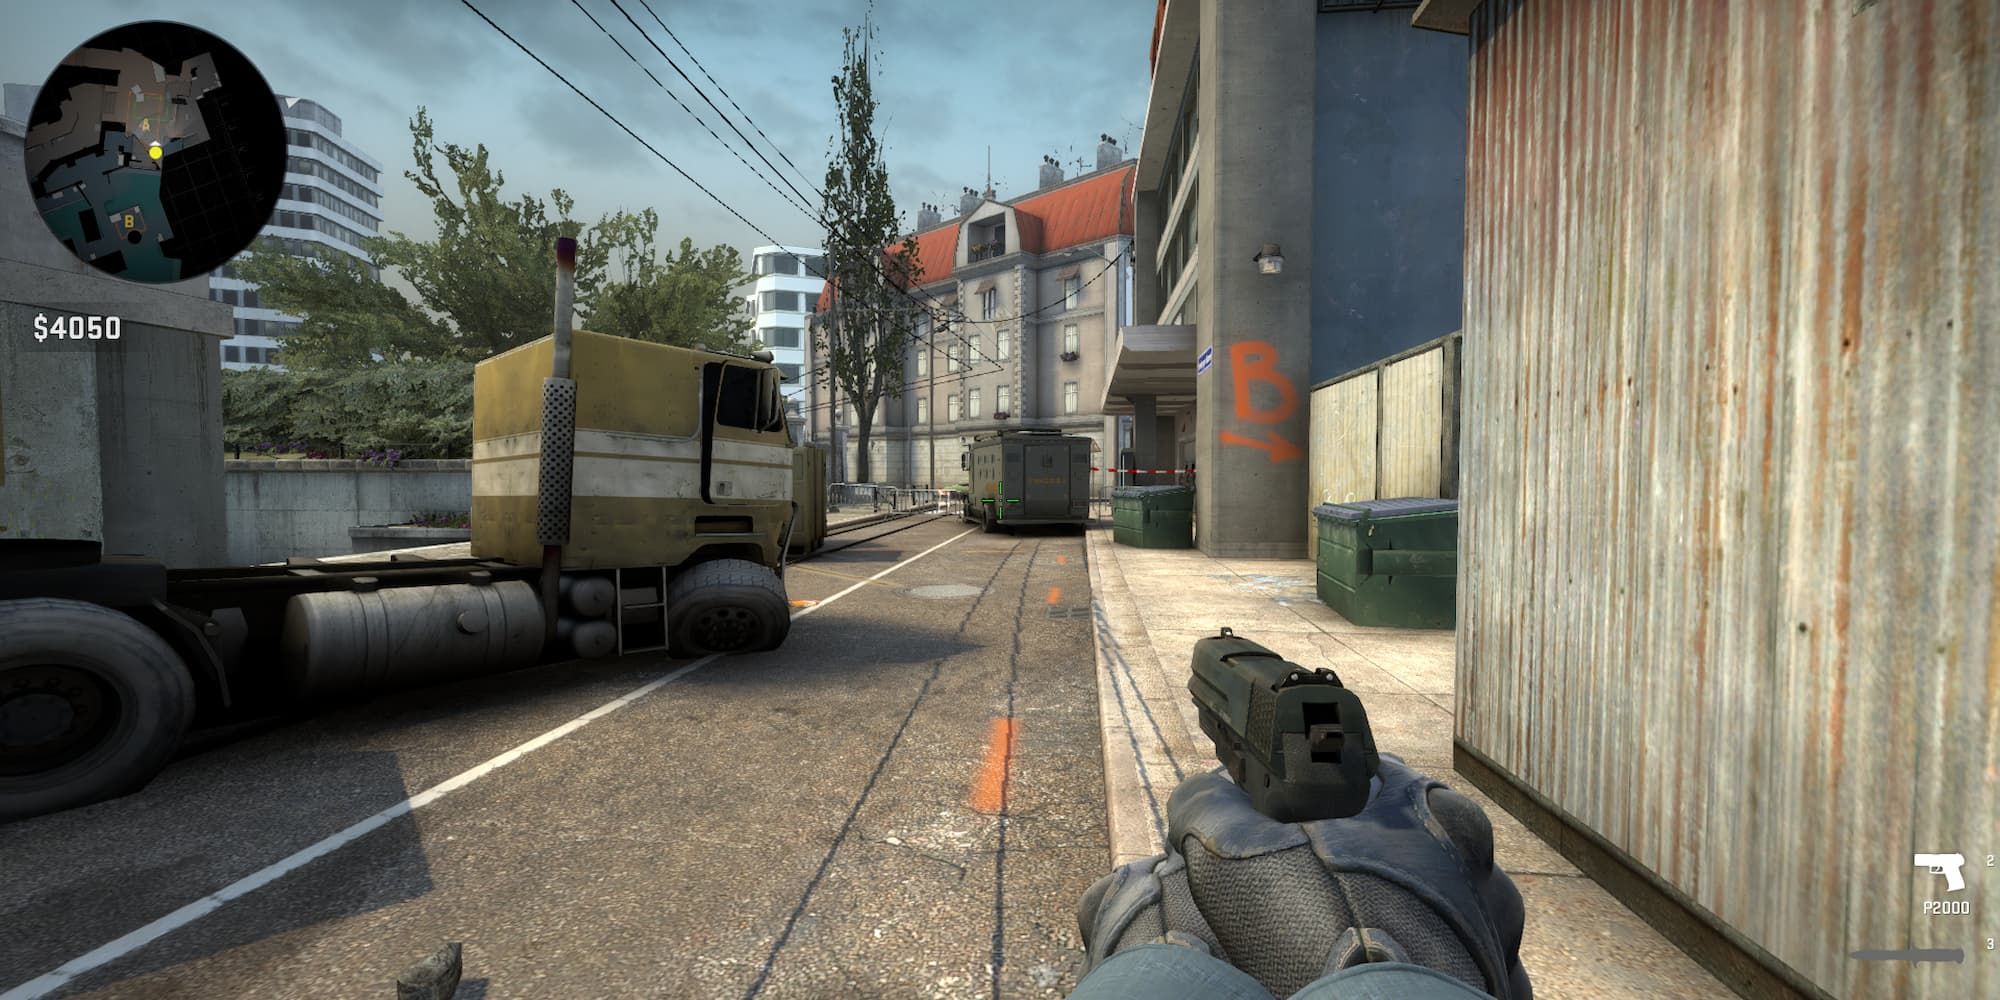 A CS:GO player camps near the broken down truck by A Site on Overpass.